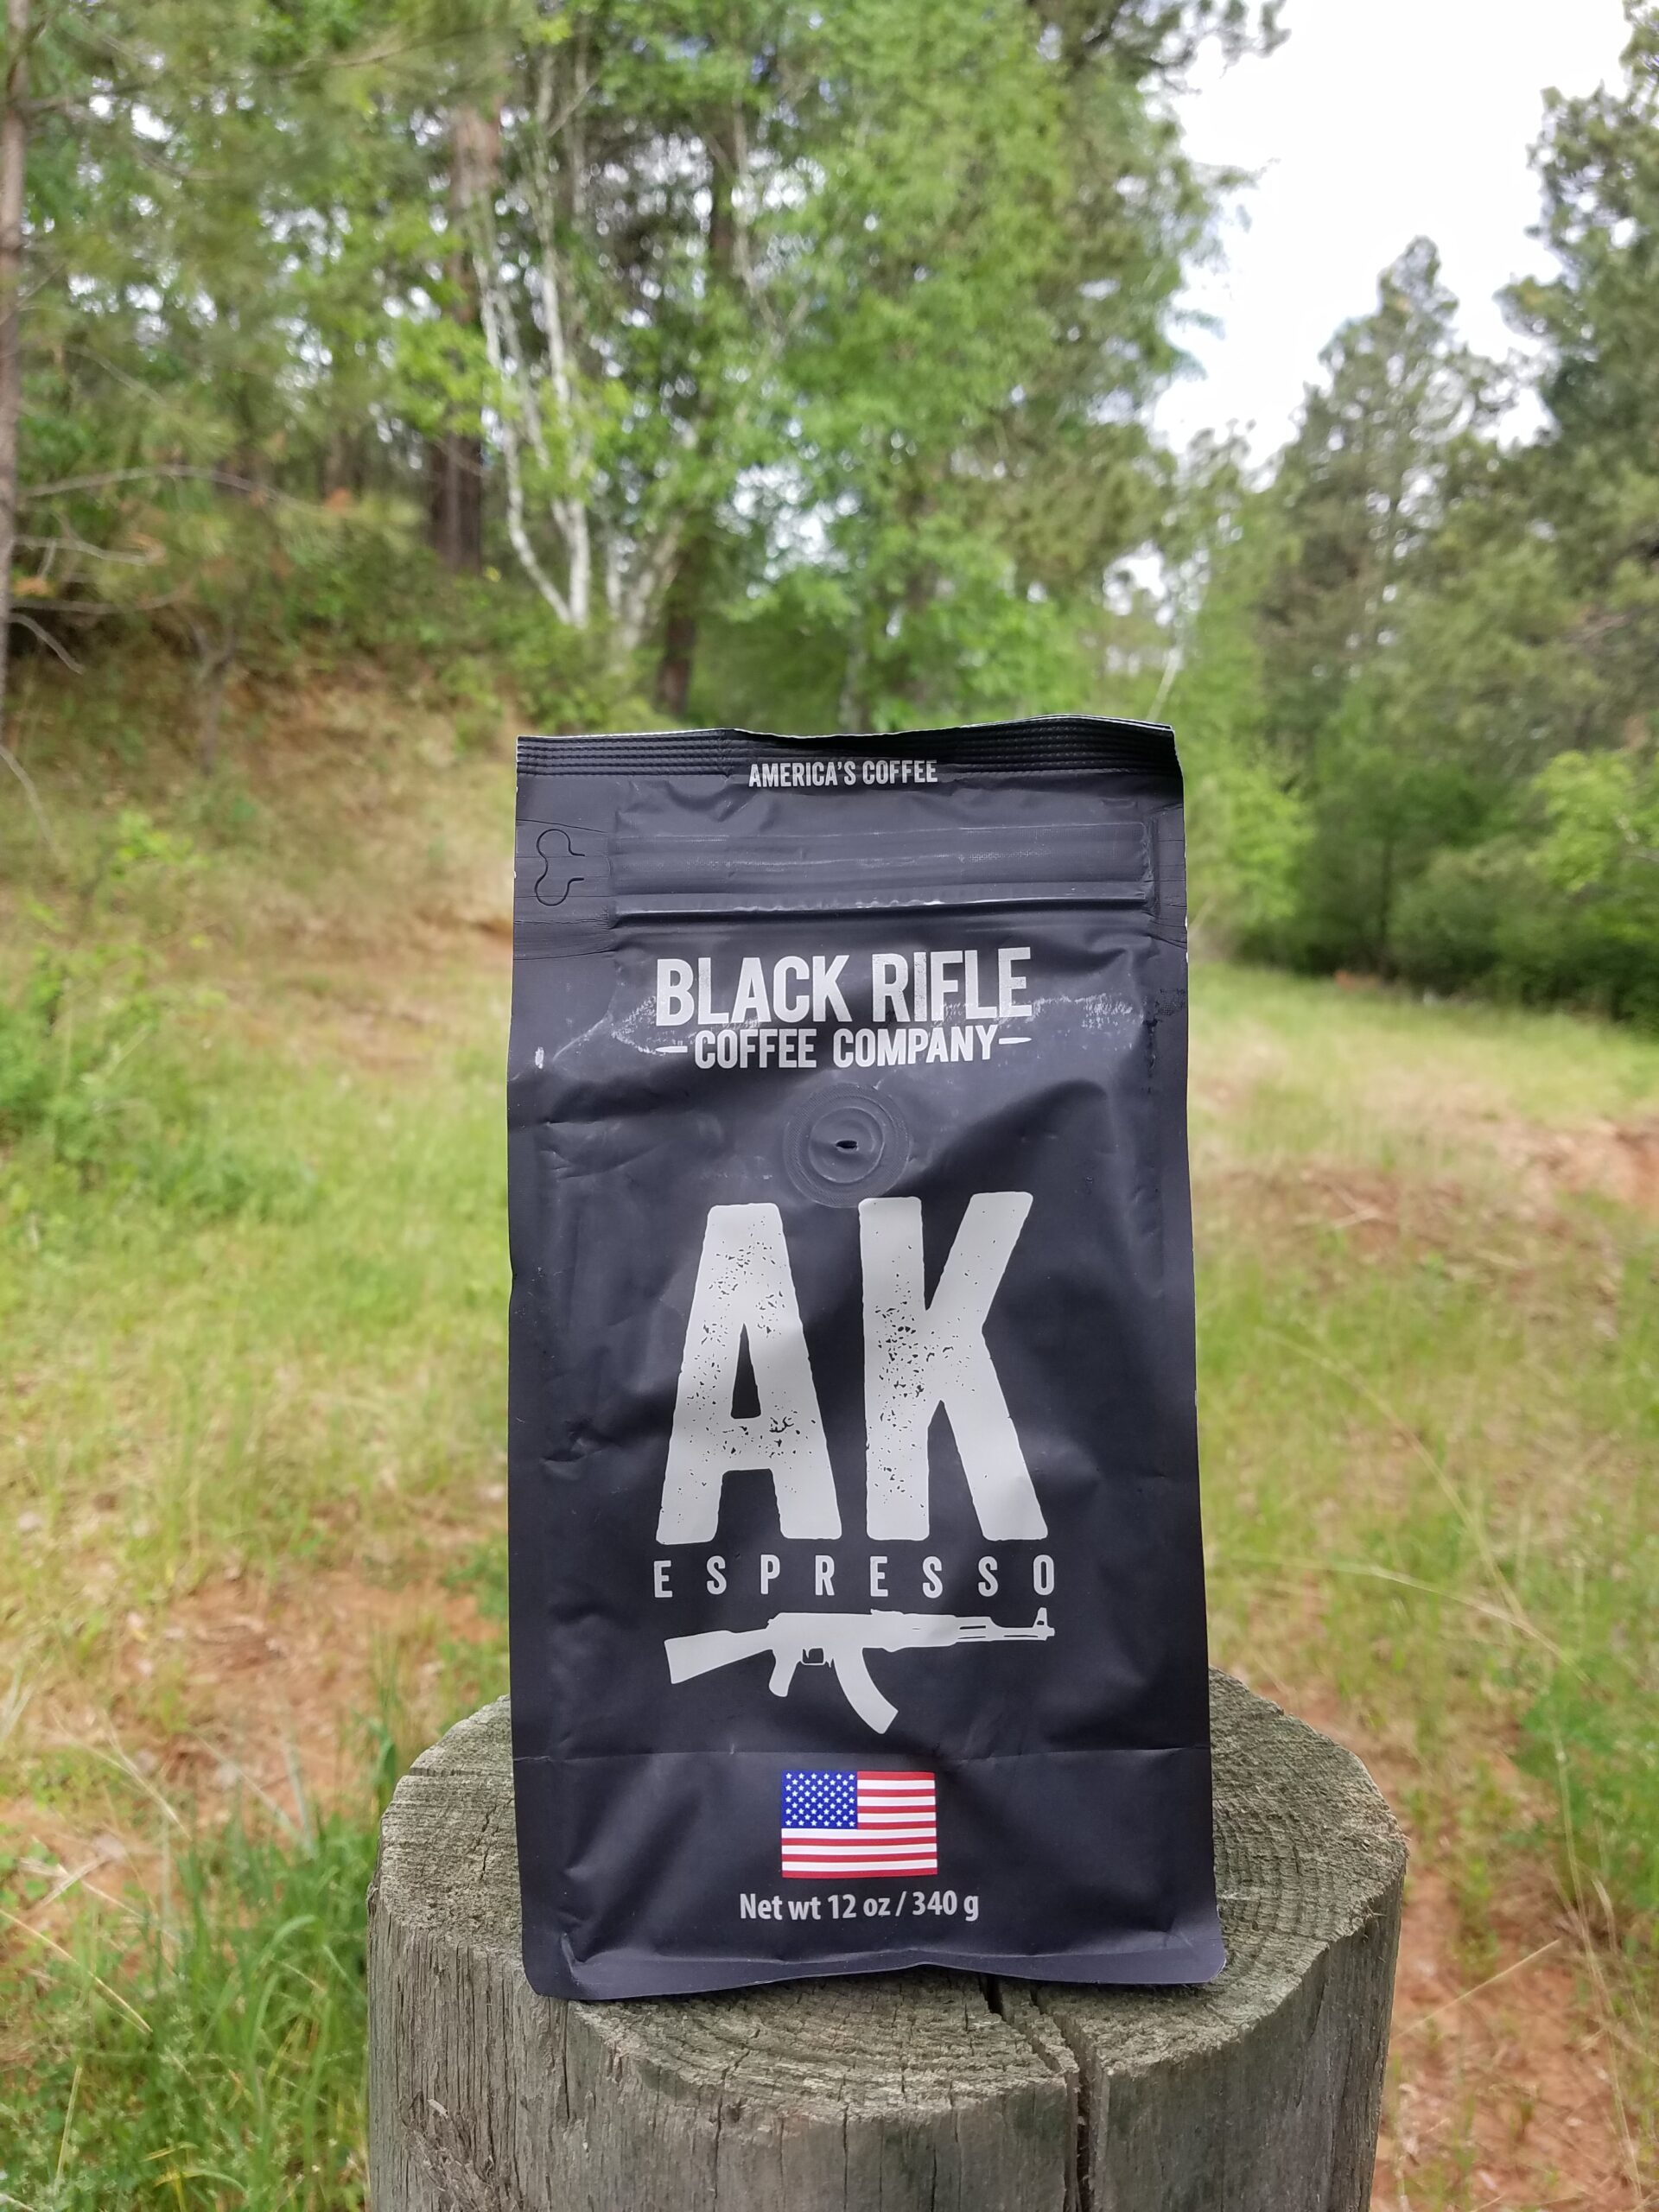 Black Rifle coffee AK Espresso bag sitting on a log with trees in the background